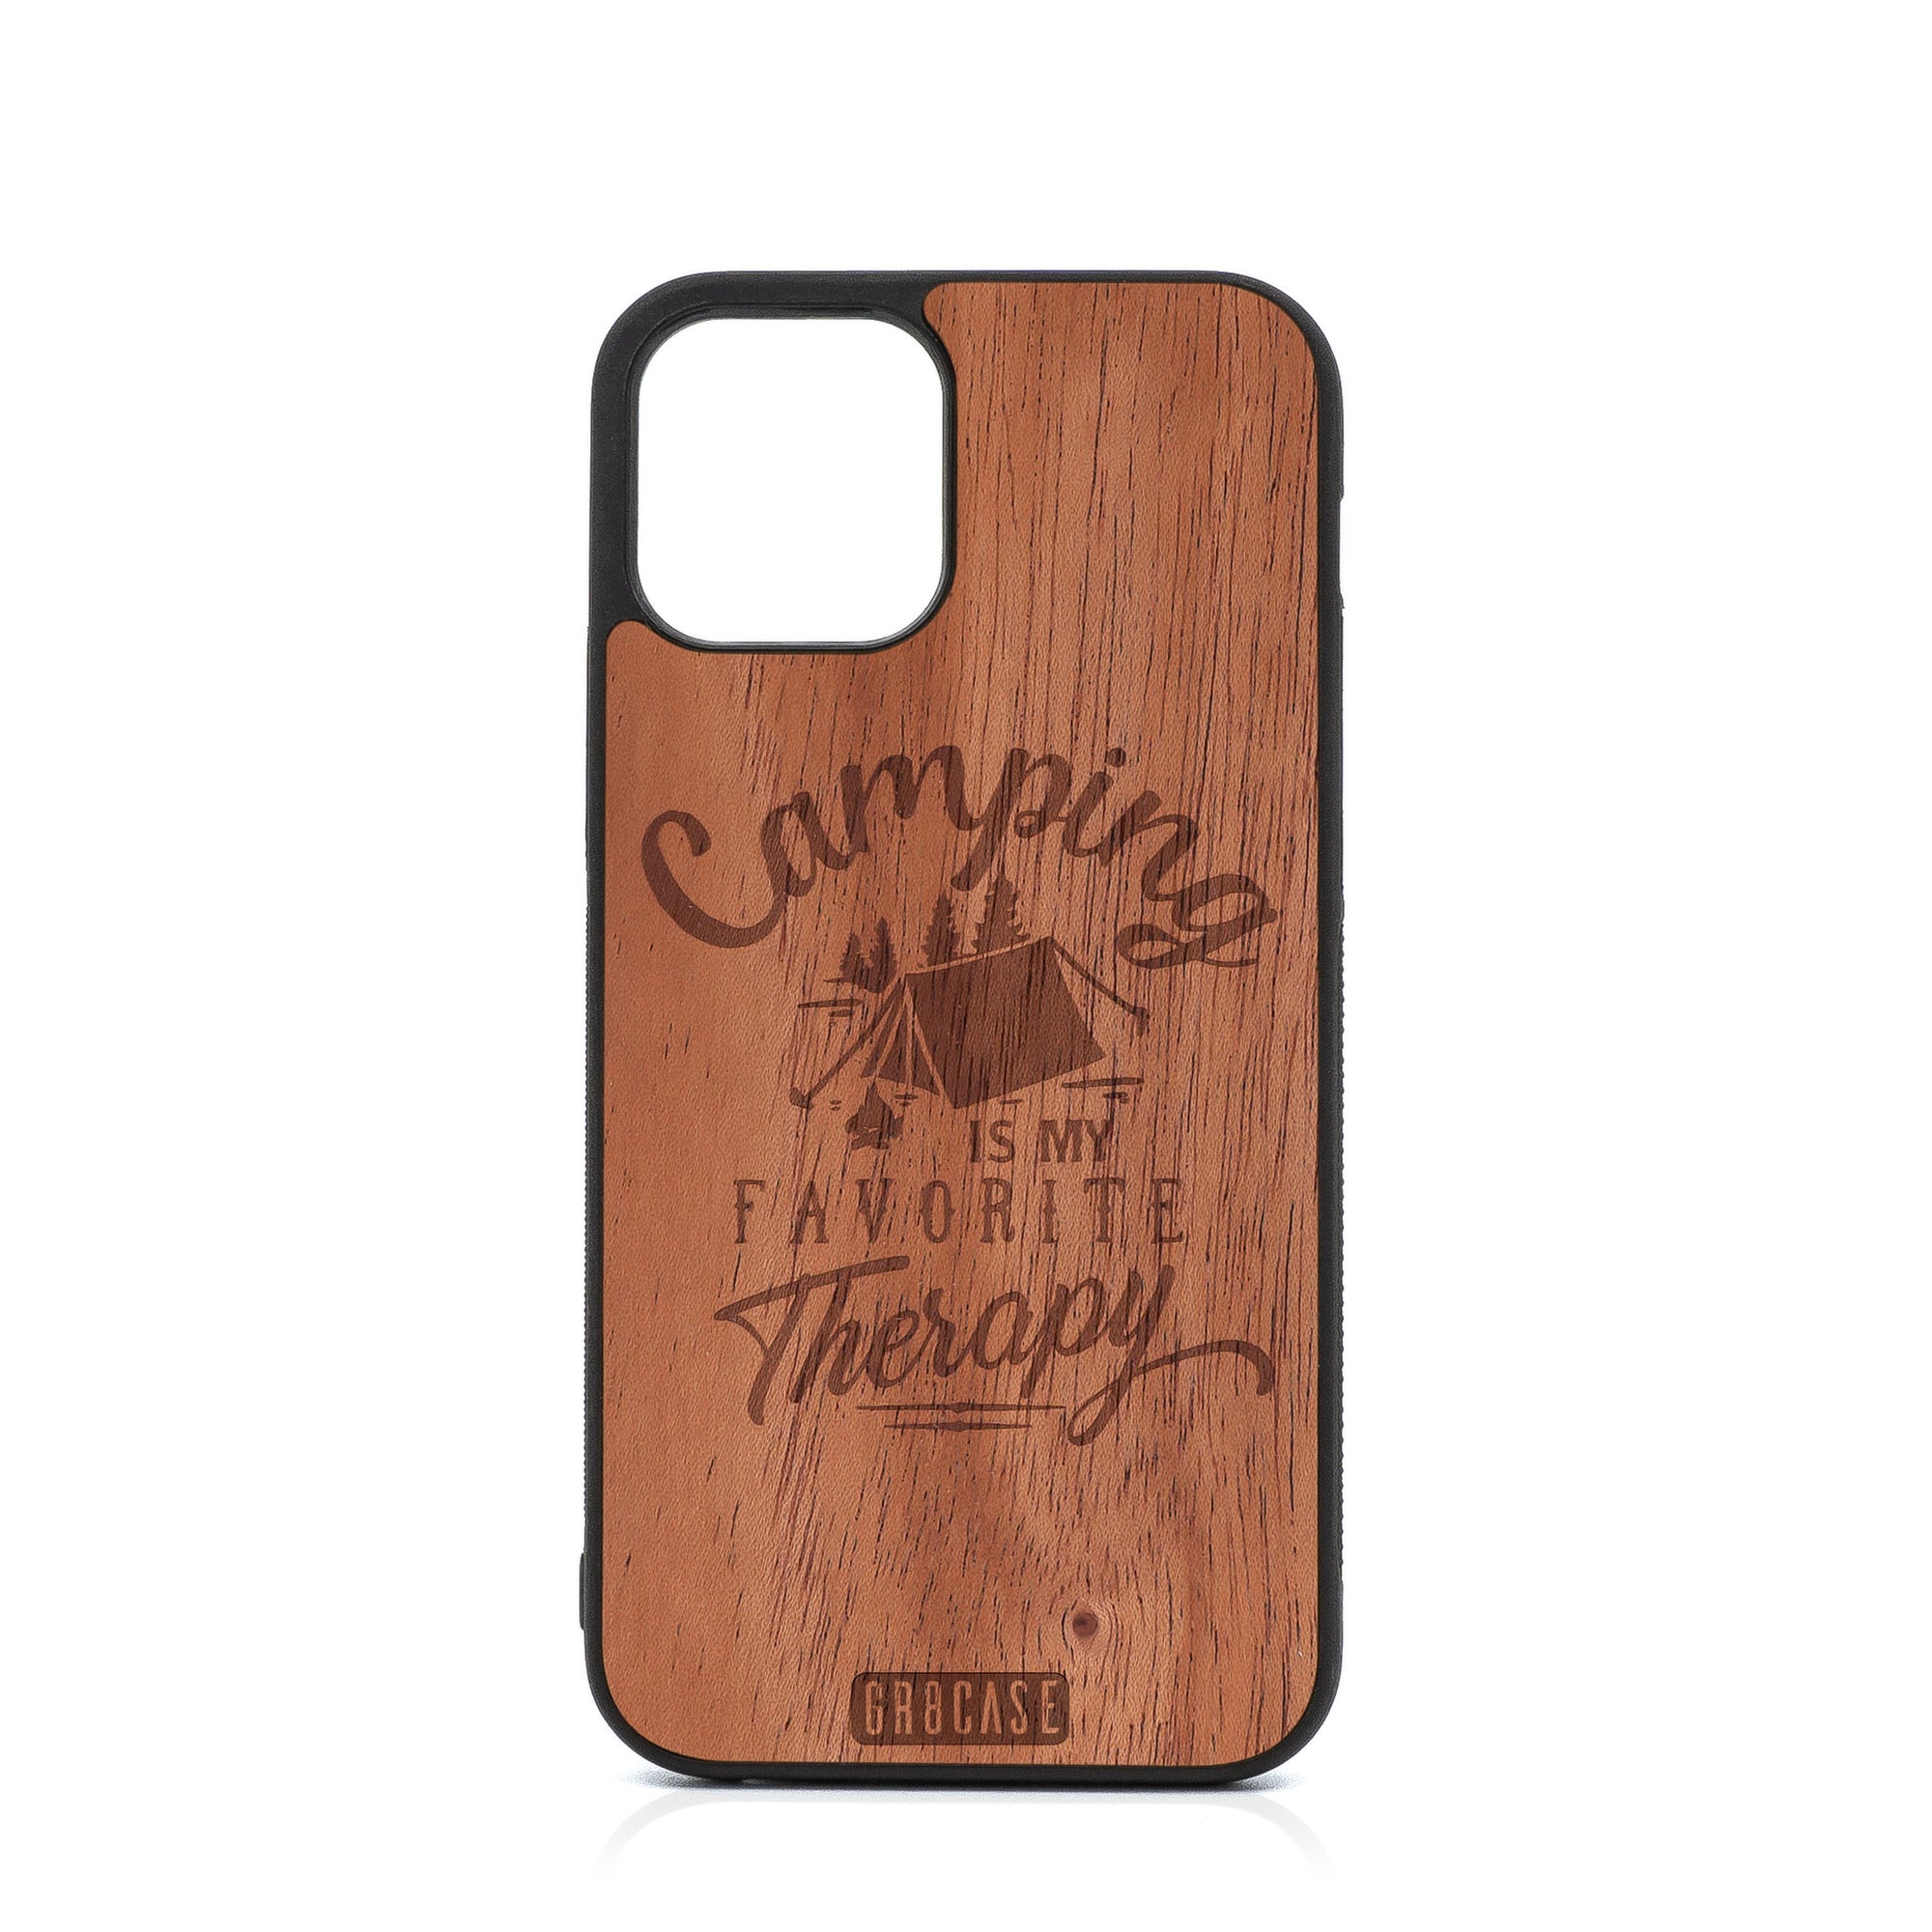 Camping Is My Favorite Therapy Design Wood Case For iPhone 12